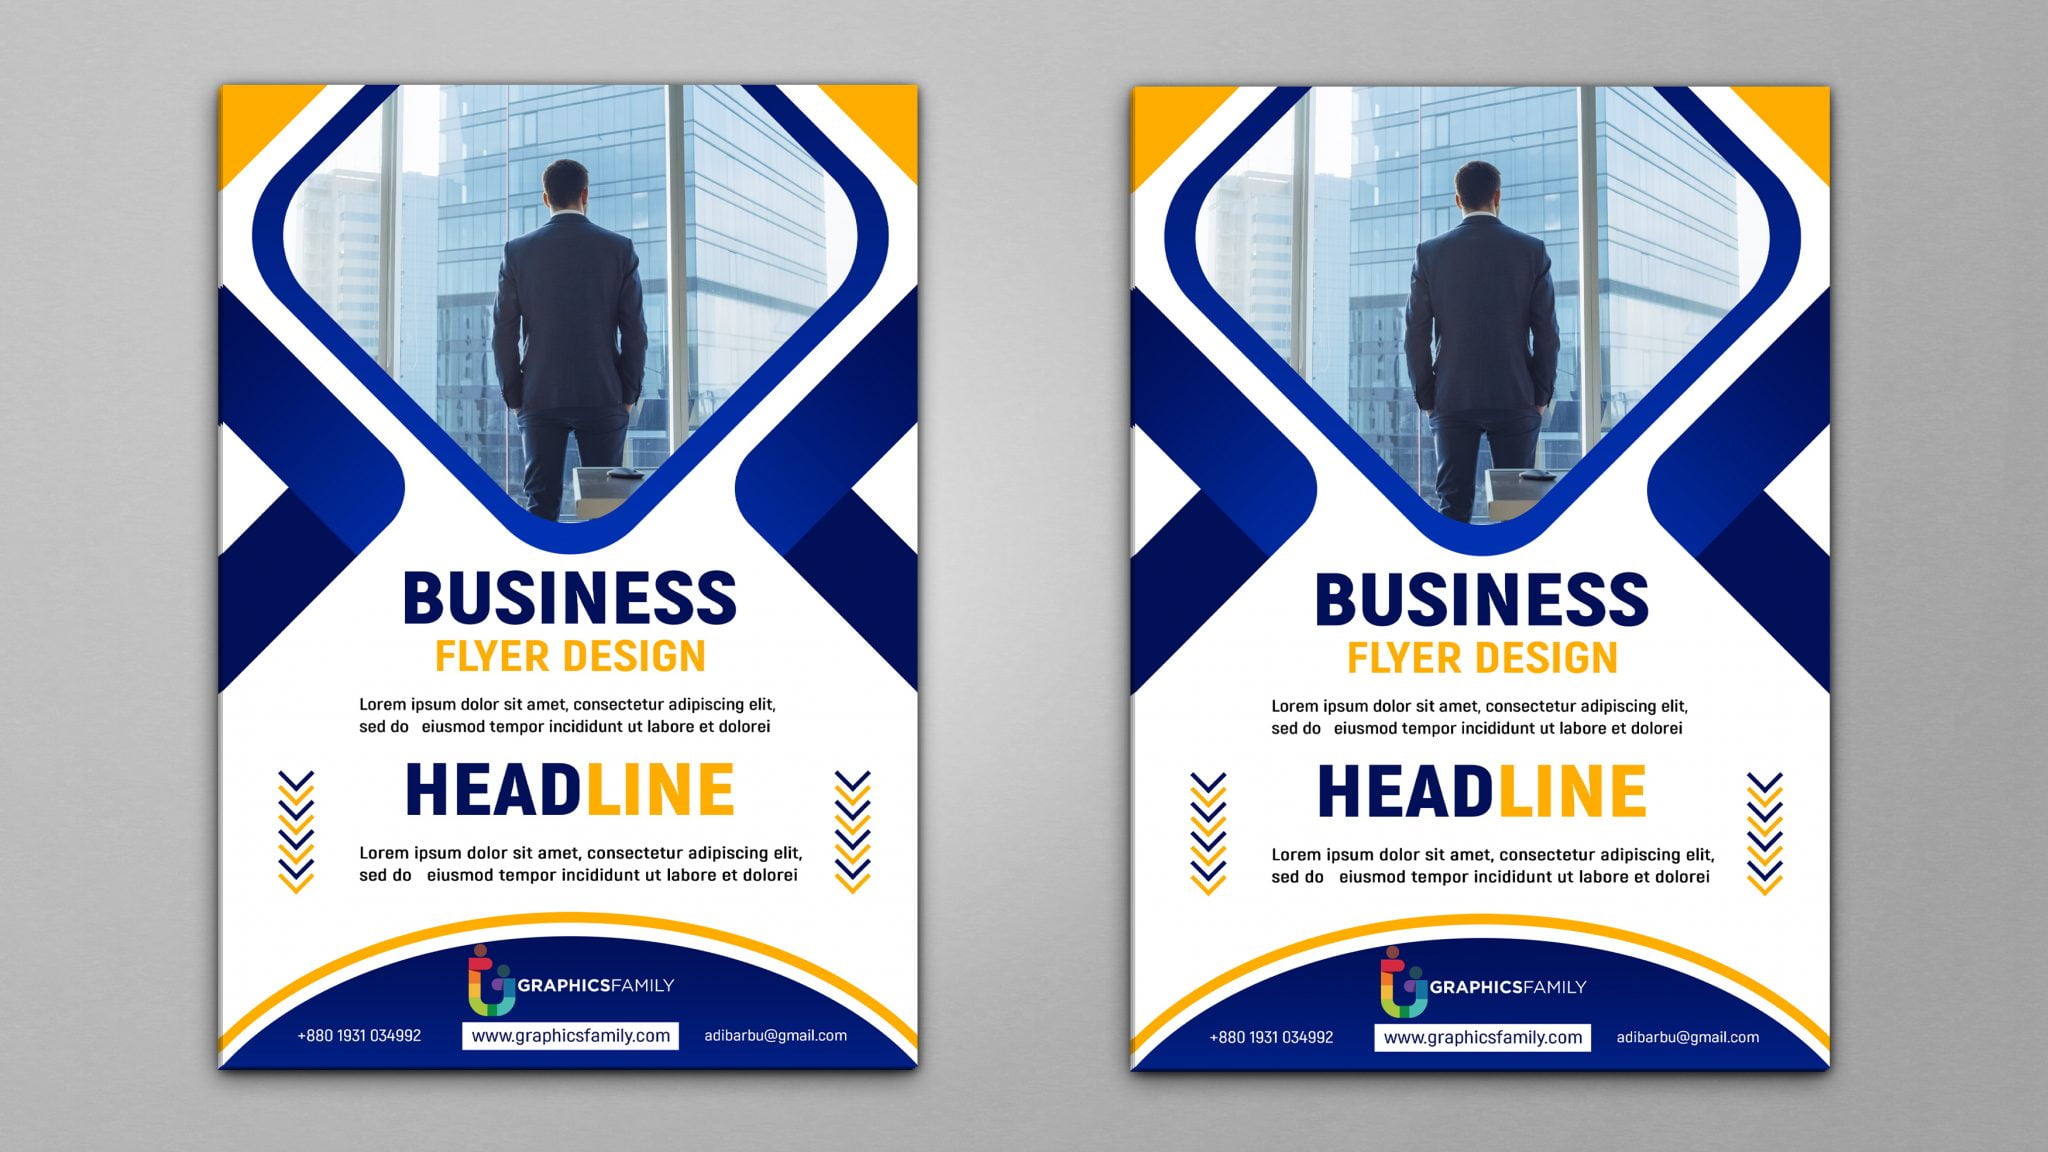 Free Business Flyer Design Photoshop Template GraphicsFamily